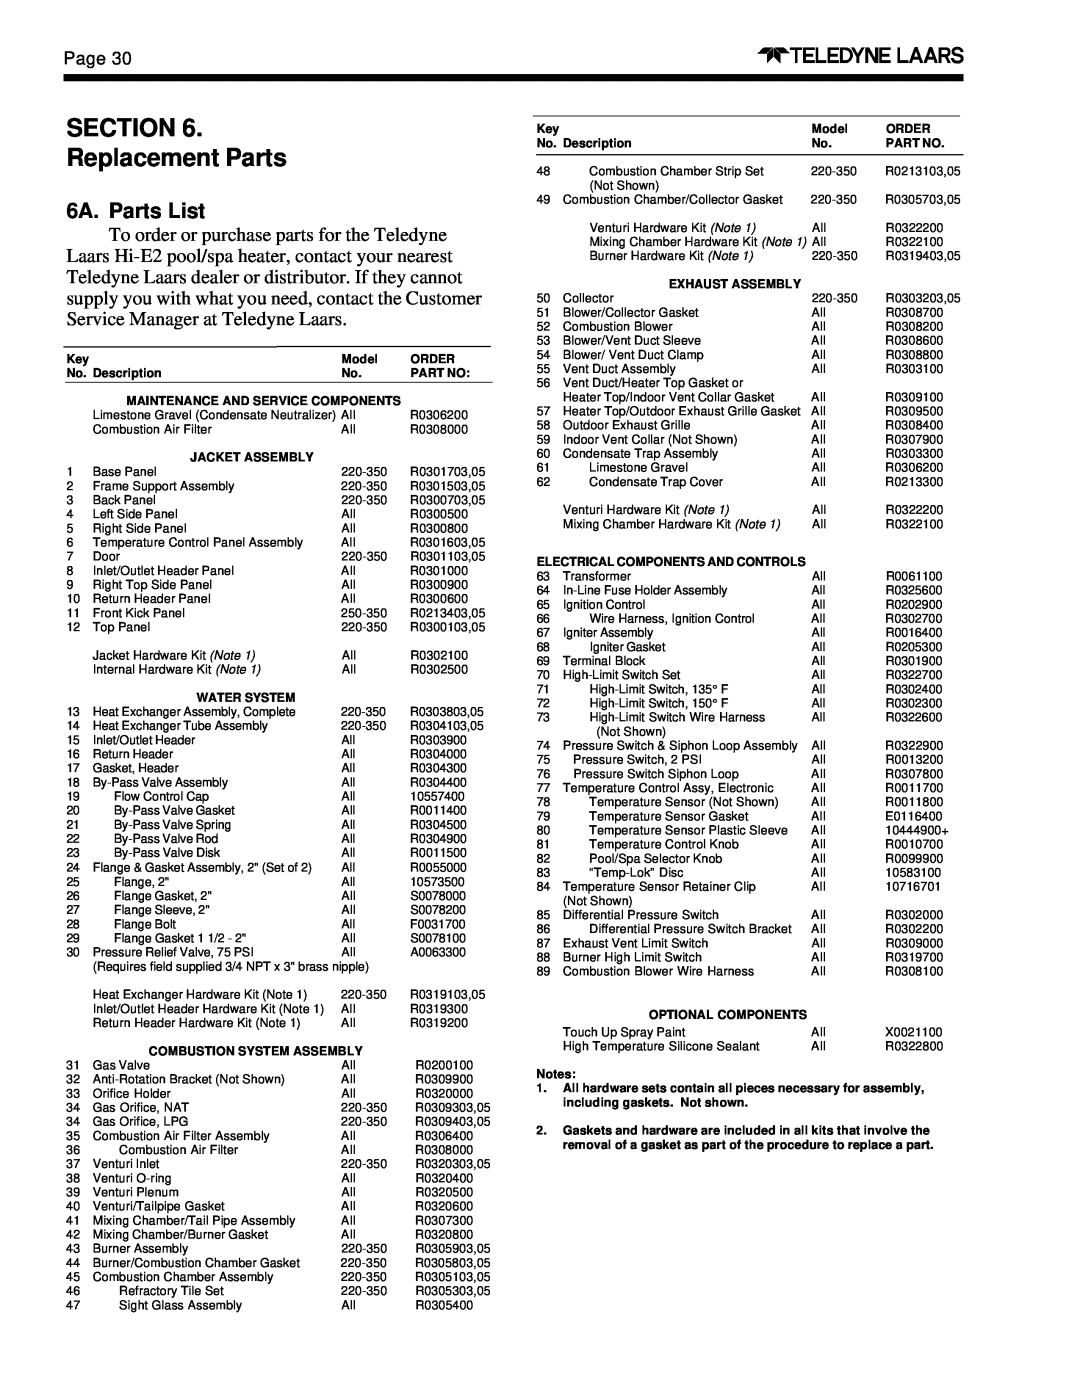 Teledyne EHE warranty SECTION Replacement Parts, 6A. Parts List, Page 